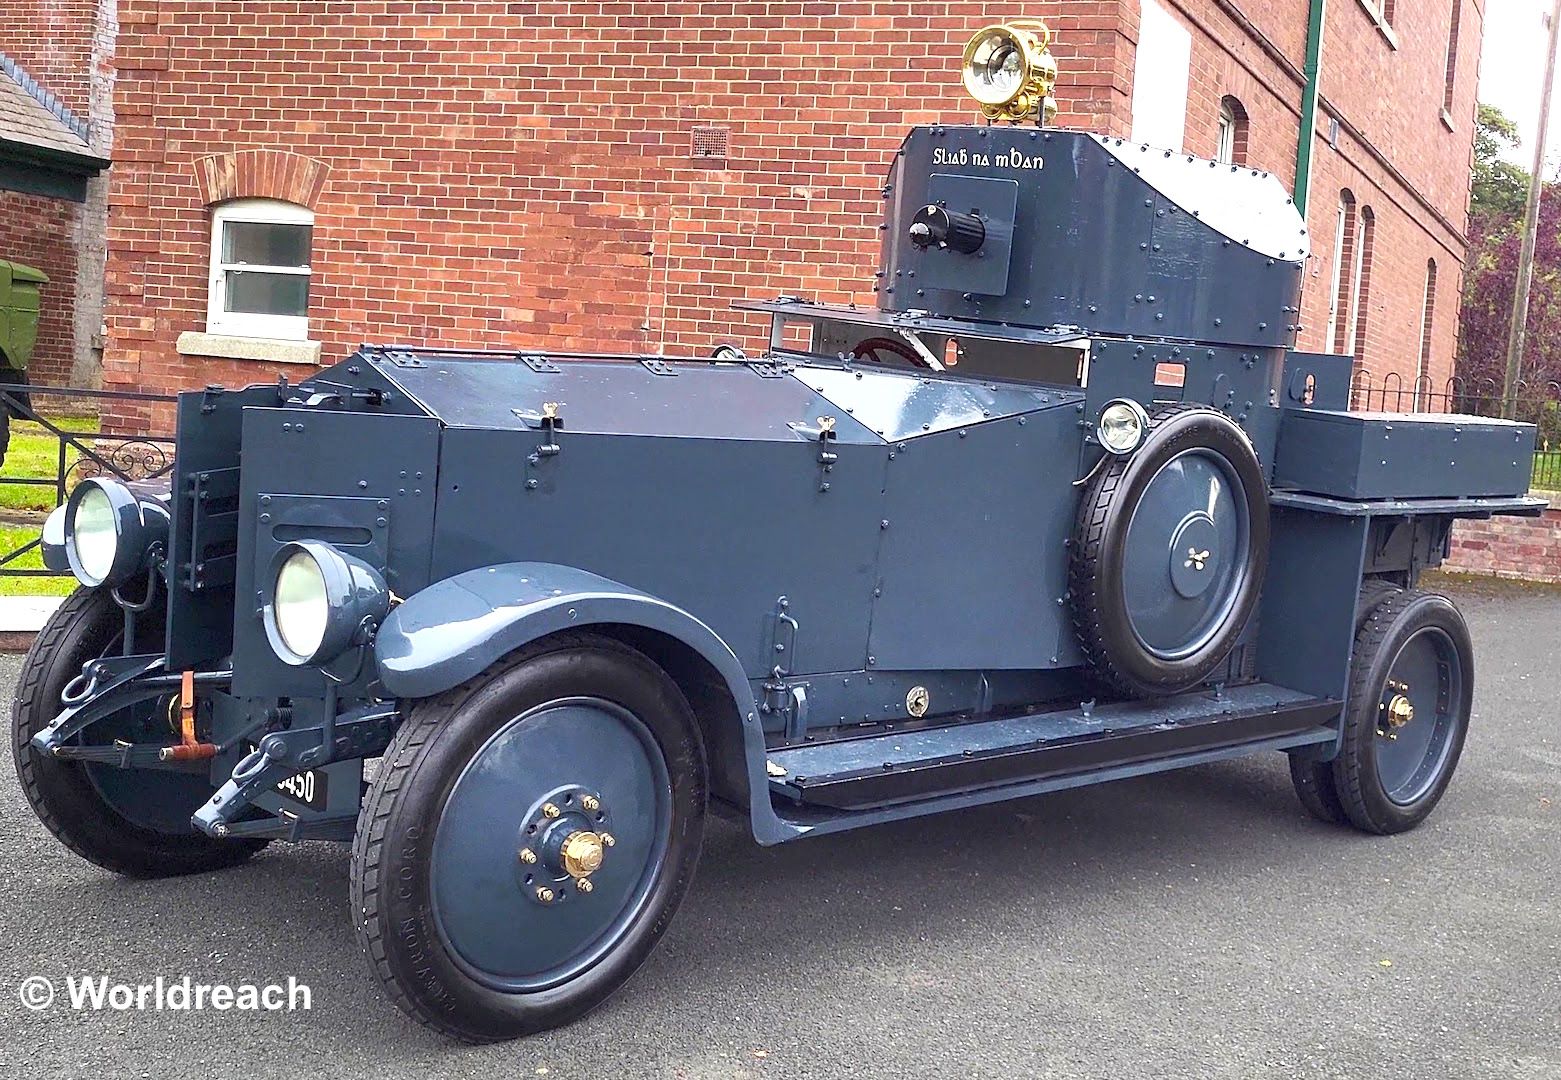 Sliabh na mBan armoured car forever tied to Michael Collins | Season 2 – Episode 94